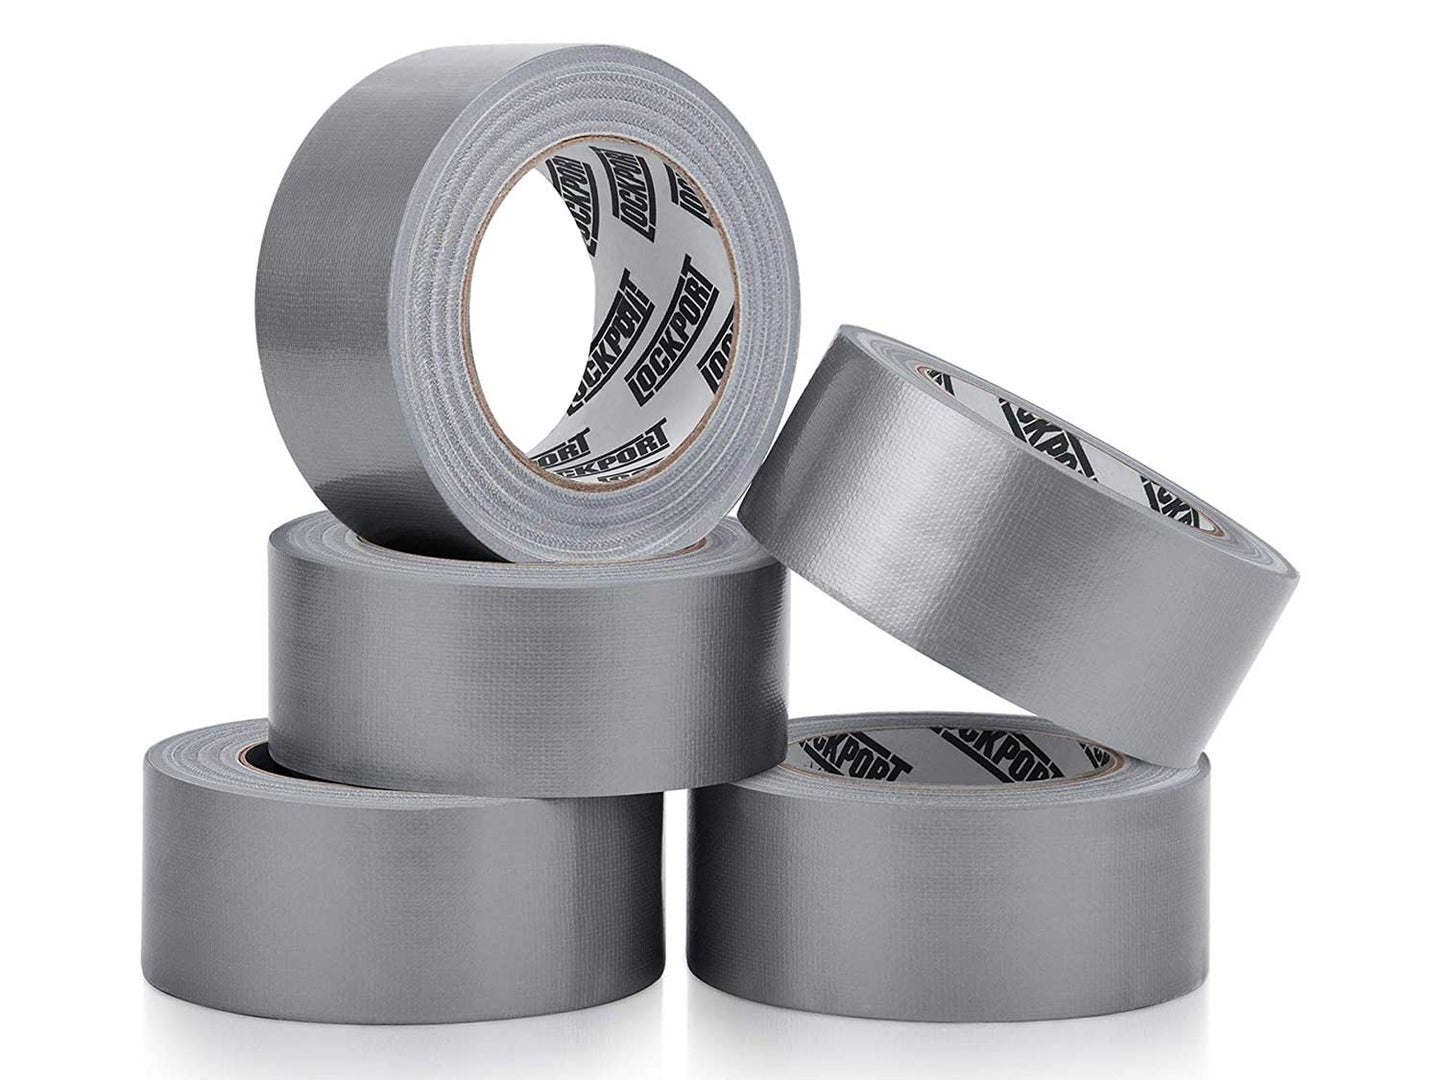 Five rolls of duct tape on a white background.